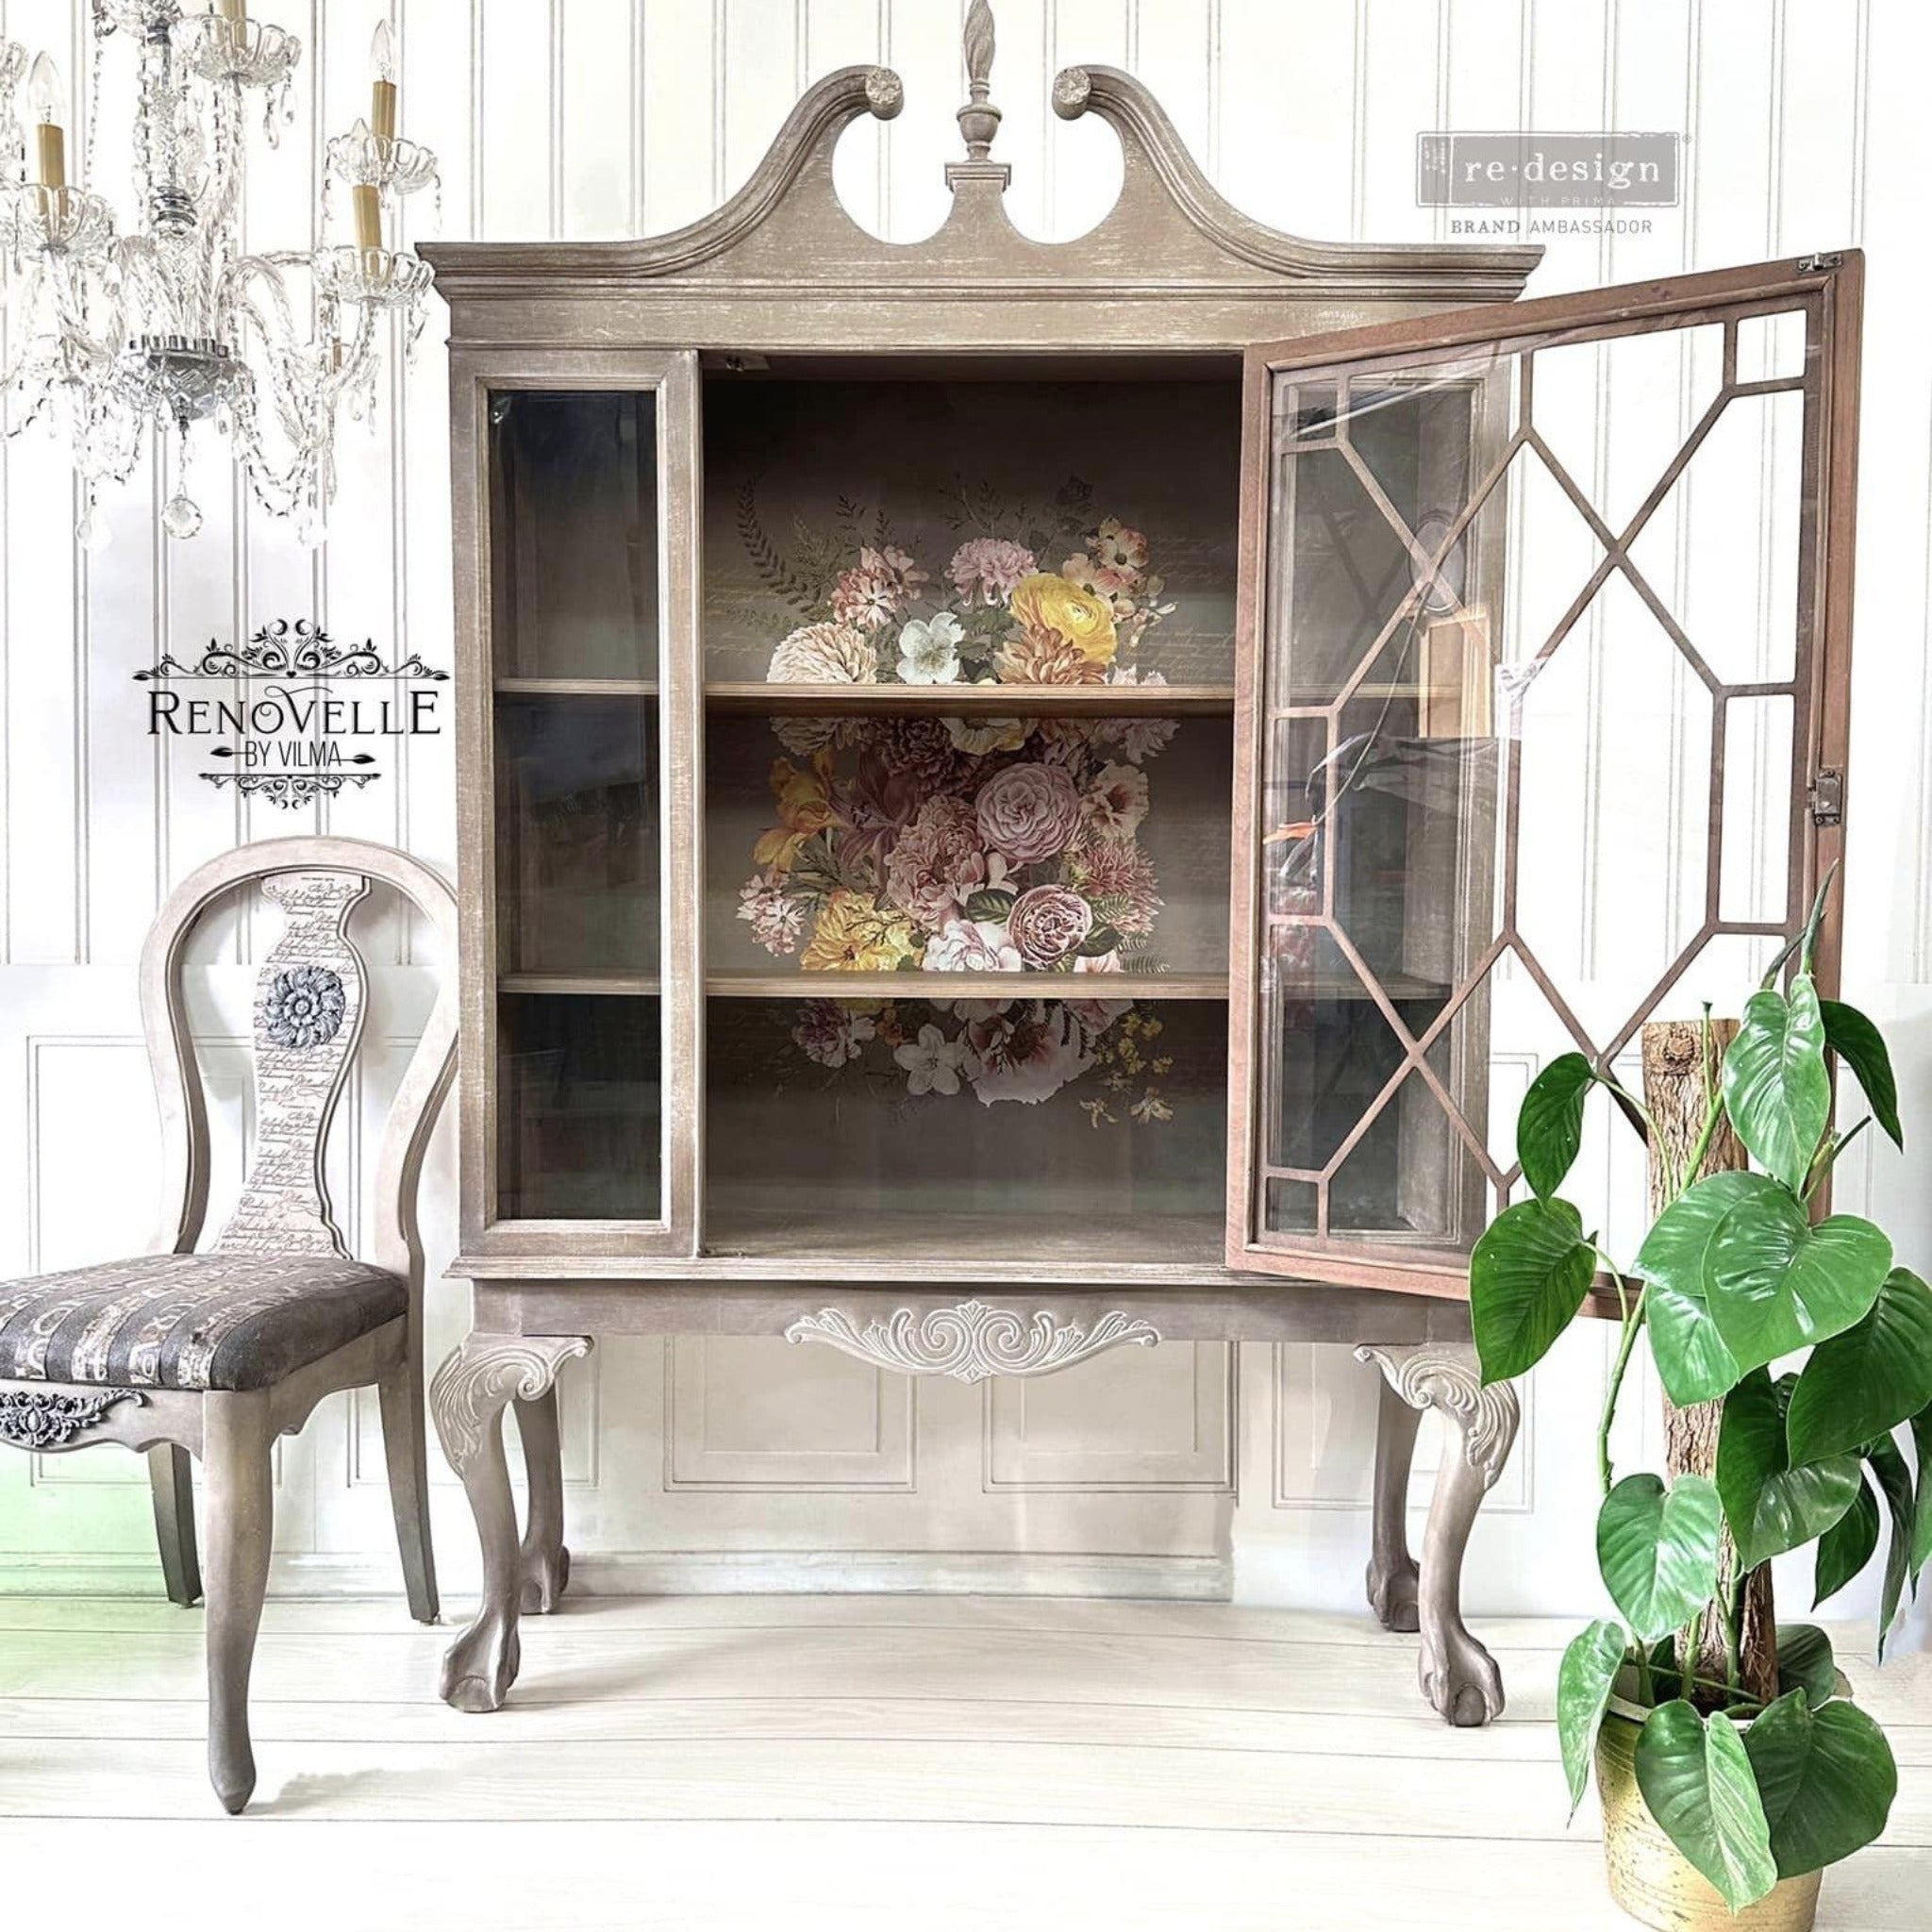 A vintage hutch with a big glass door refurbished by Renovelle by Vilma is a natural wood with white-wash color and features ReDesign with Prima's Kacha Woodland Floral transfer inside on the backboard.